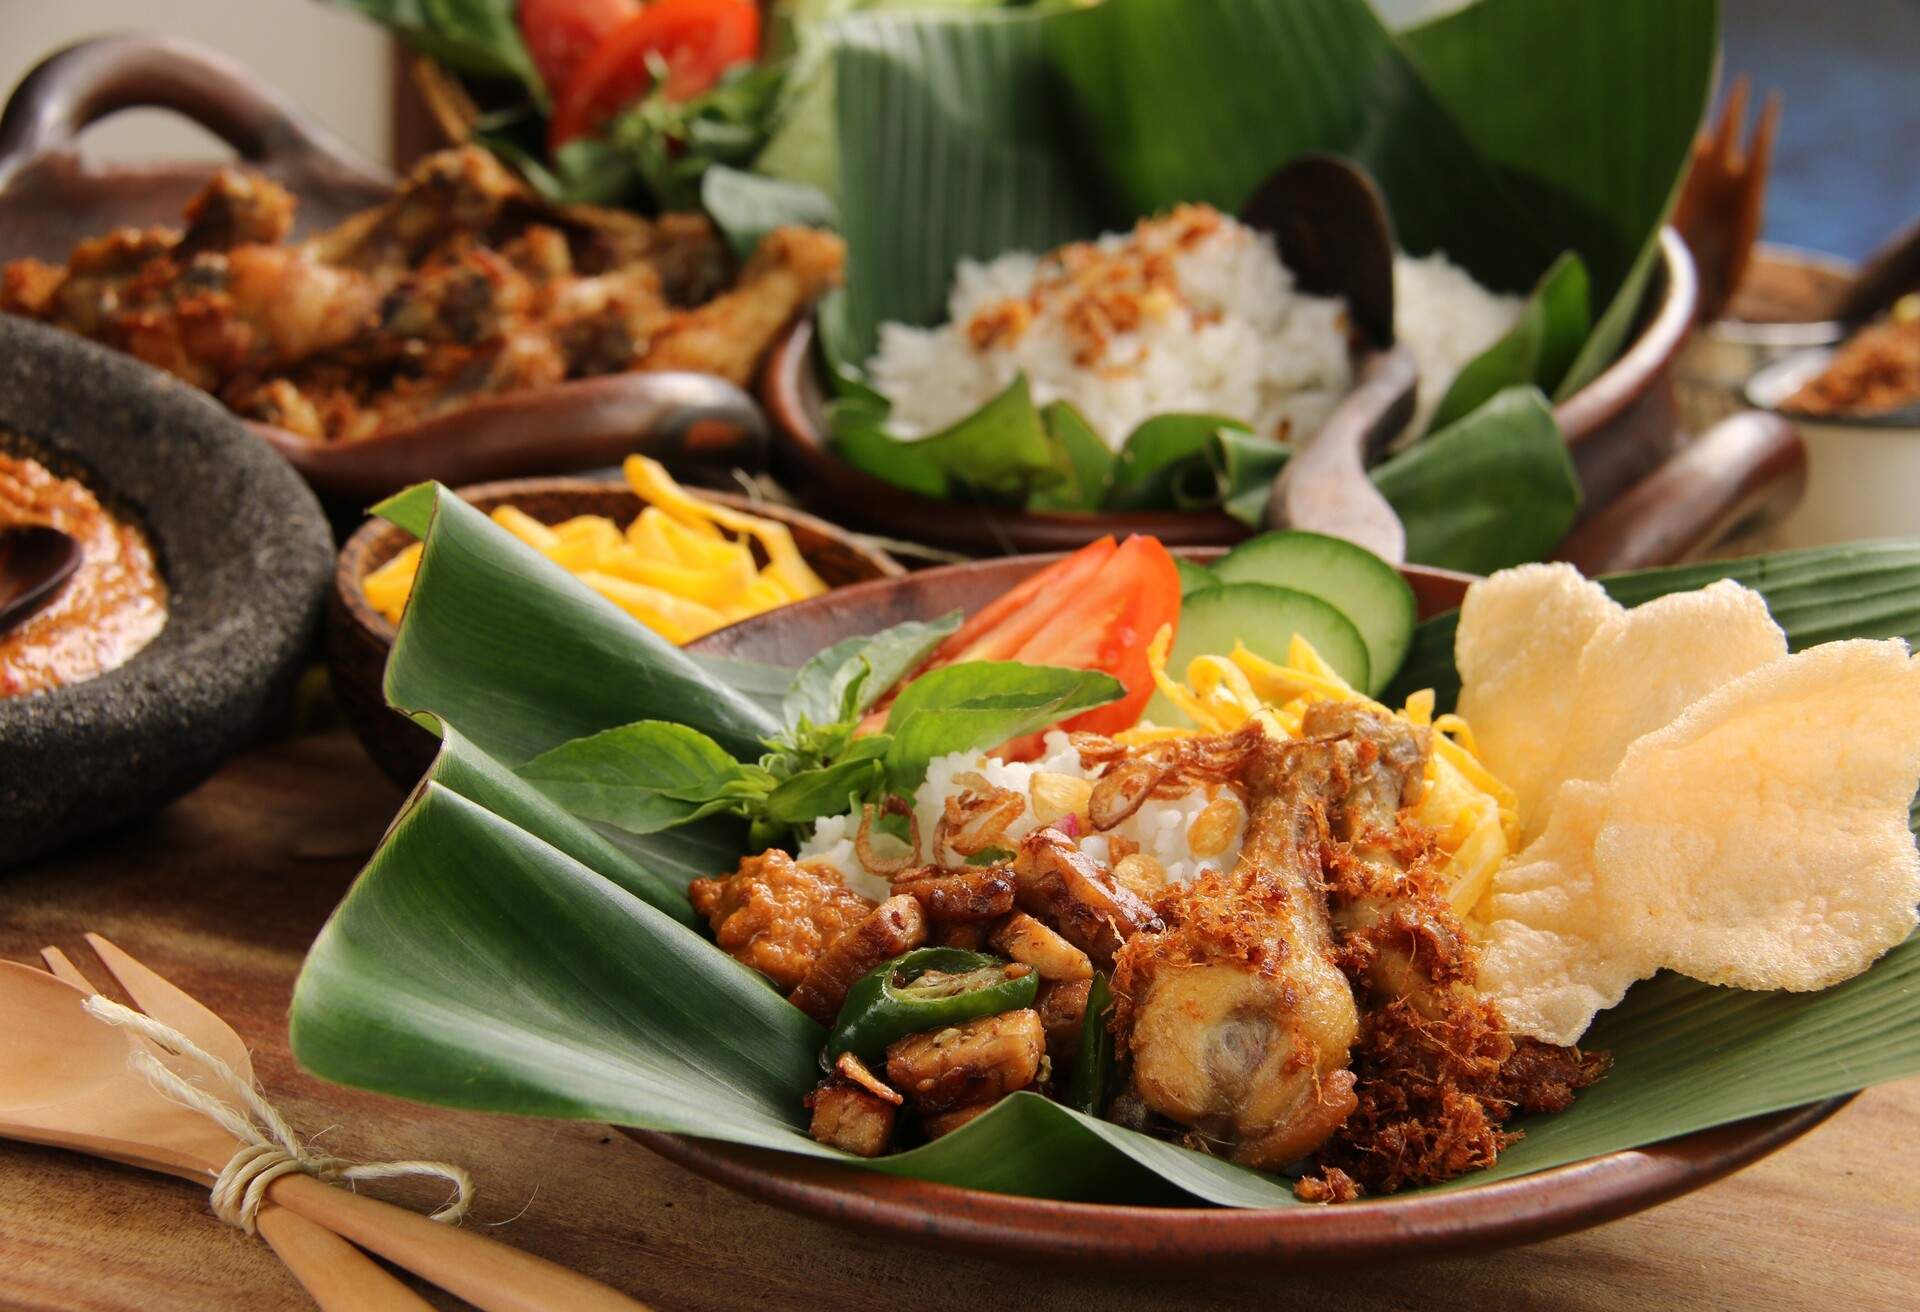 Nasi Uduk Betawi. Coconut flavored steamed rice dish from Betawi, Jakarta. Served with fried chicken, sauteed tempeh, omelet, cracker crisps, fresh vegetables and spicy peanut sauce.; Shutterstock ID 494293957